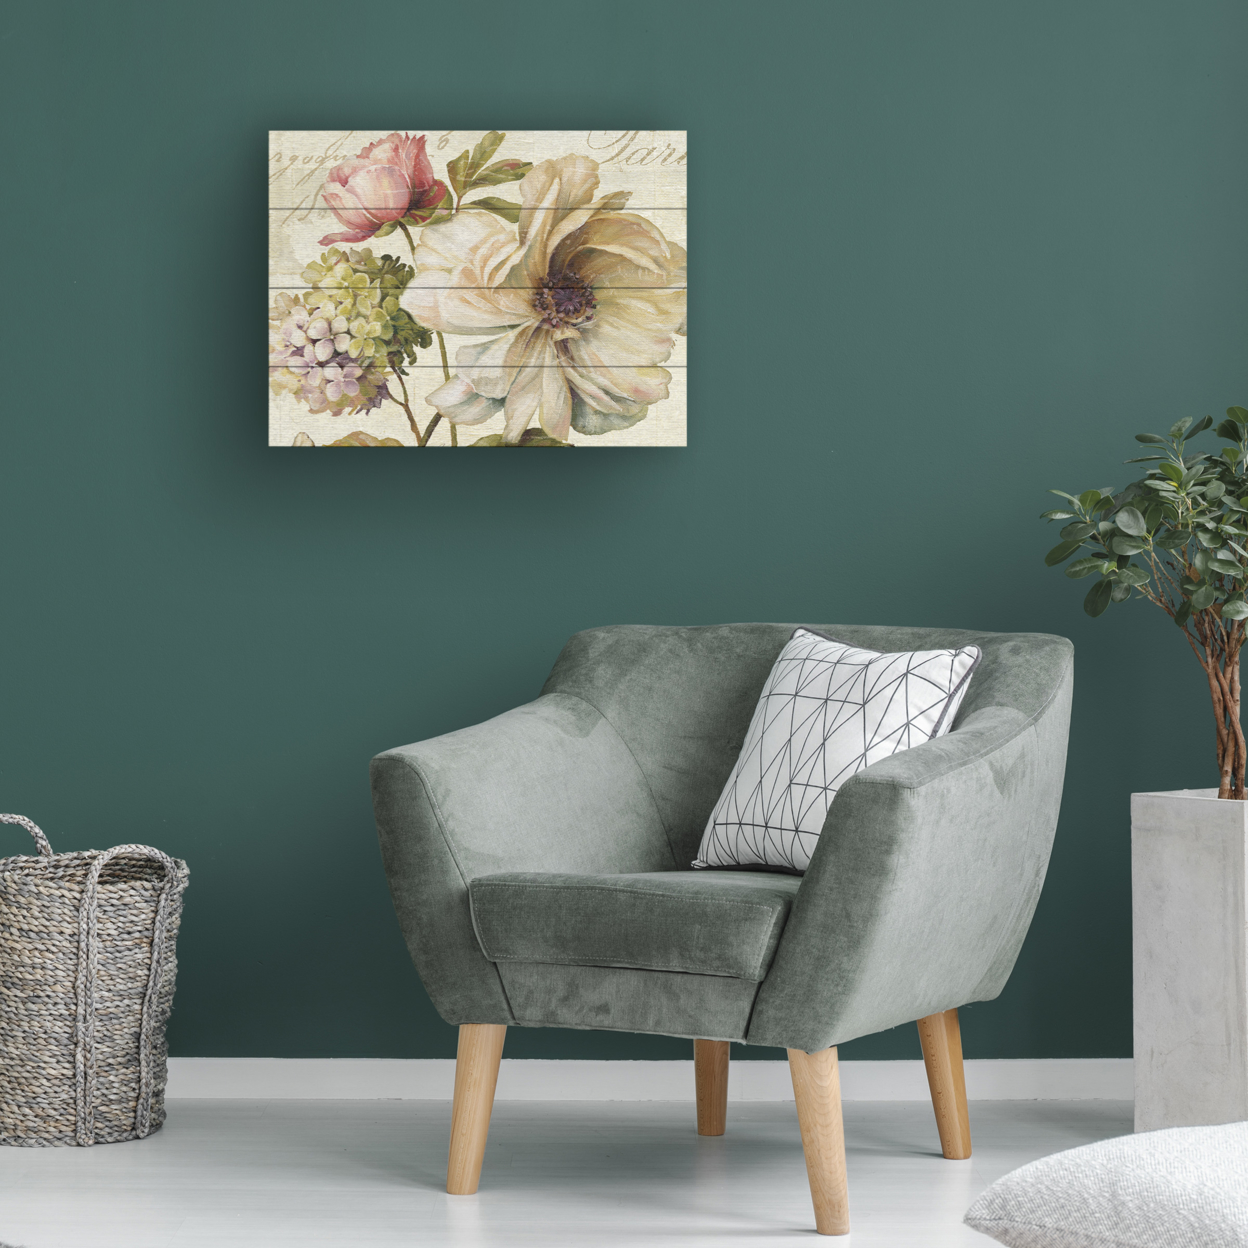 Wall Art 12 X 16 Inches Titled Marche De Fleurs II Ready To Hang Printed On Wooden Planks